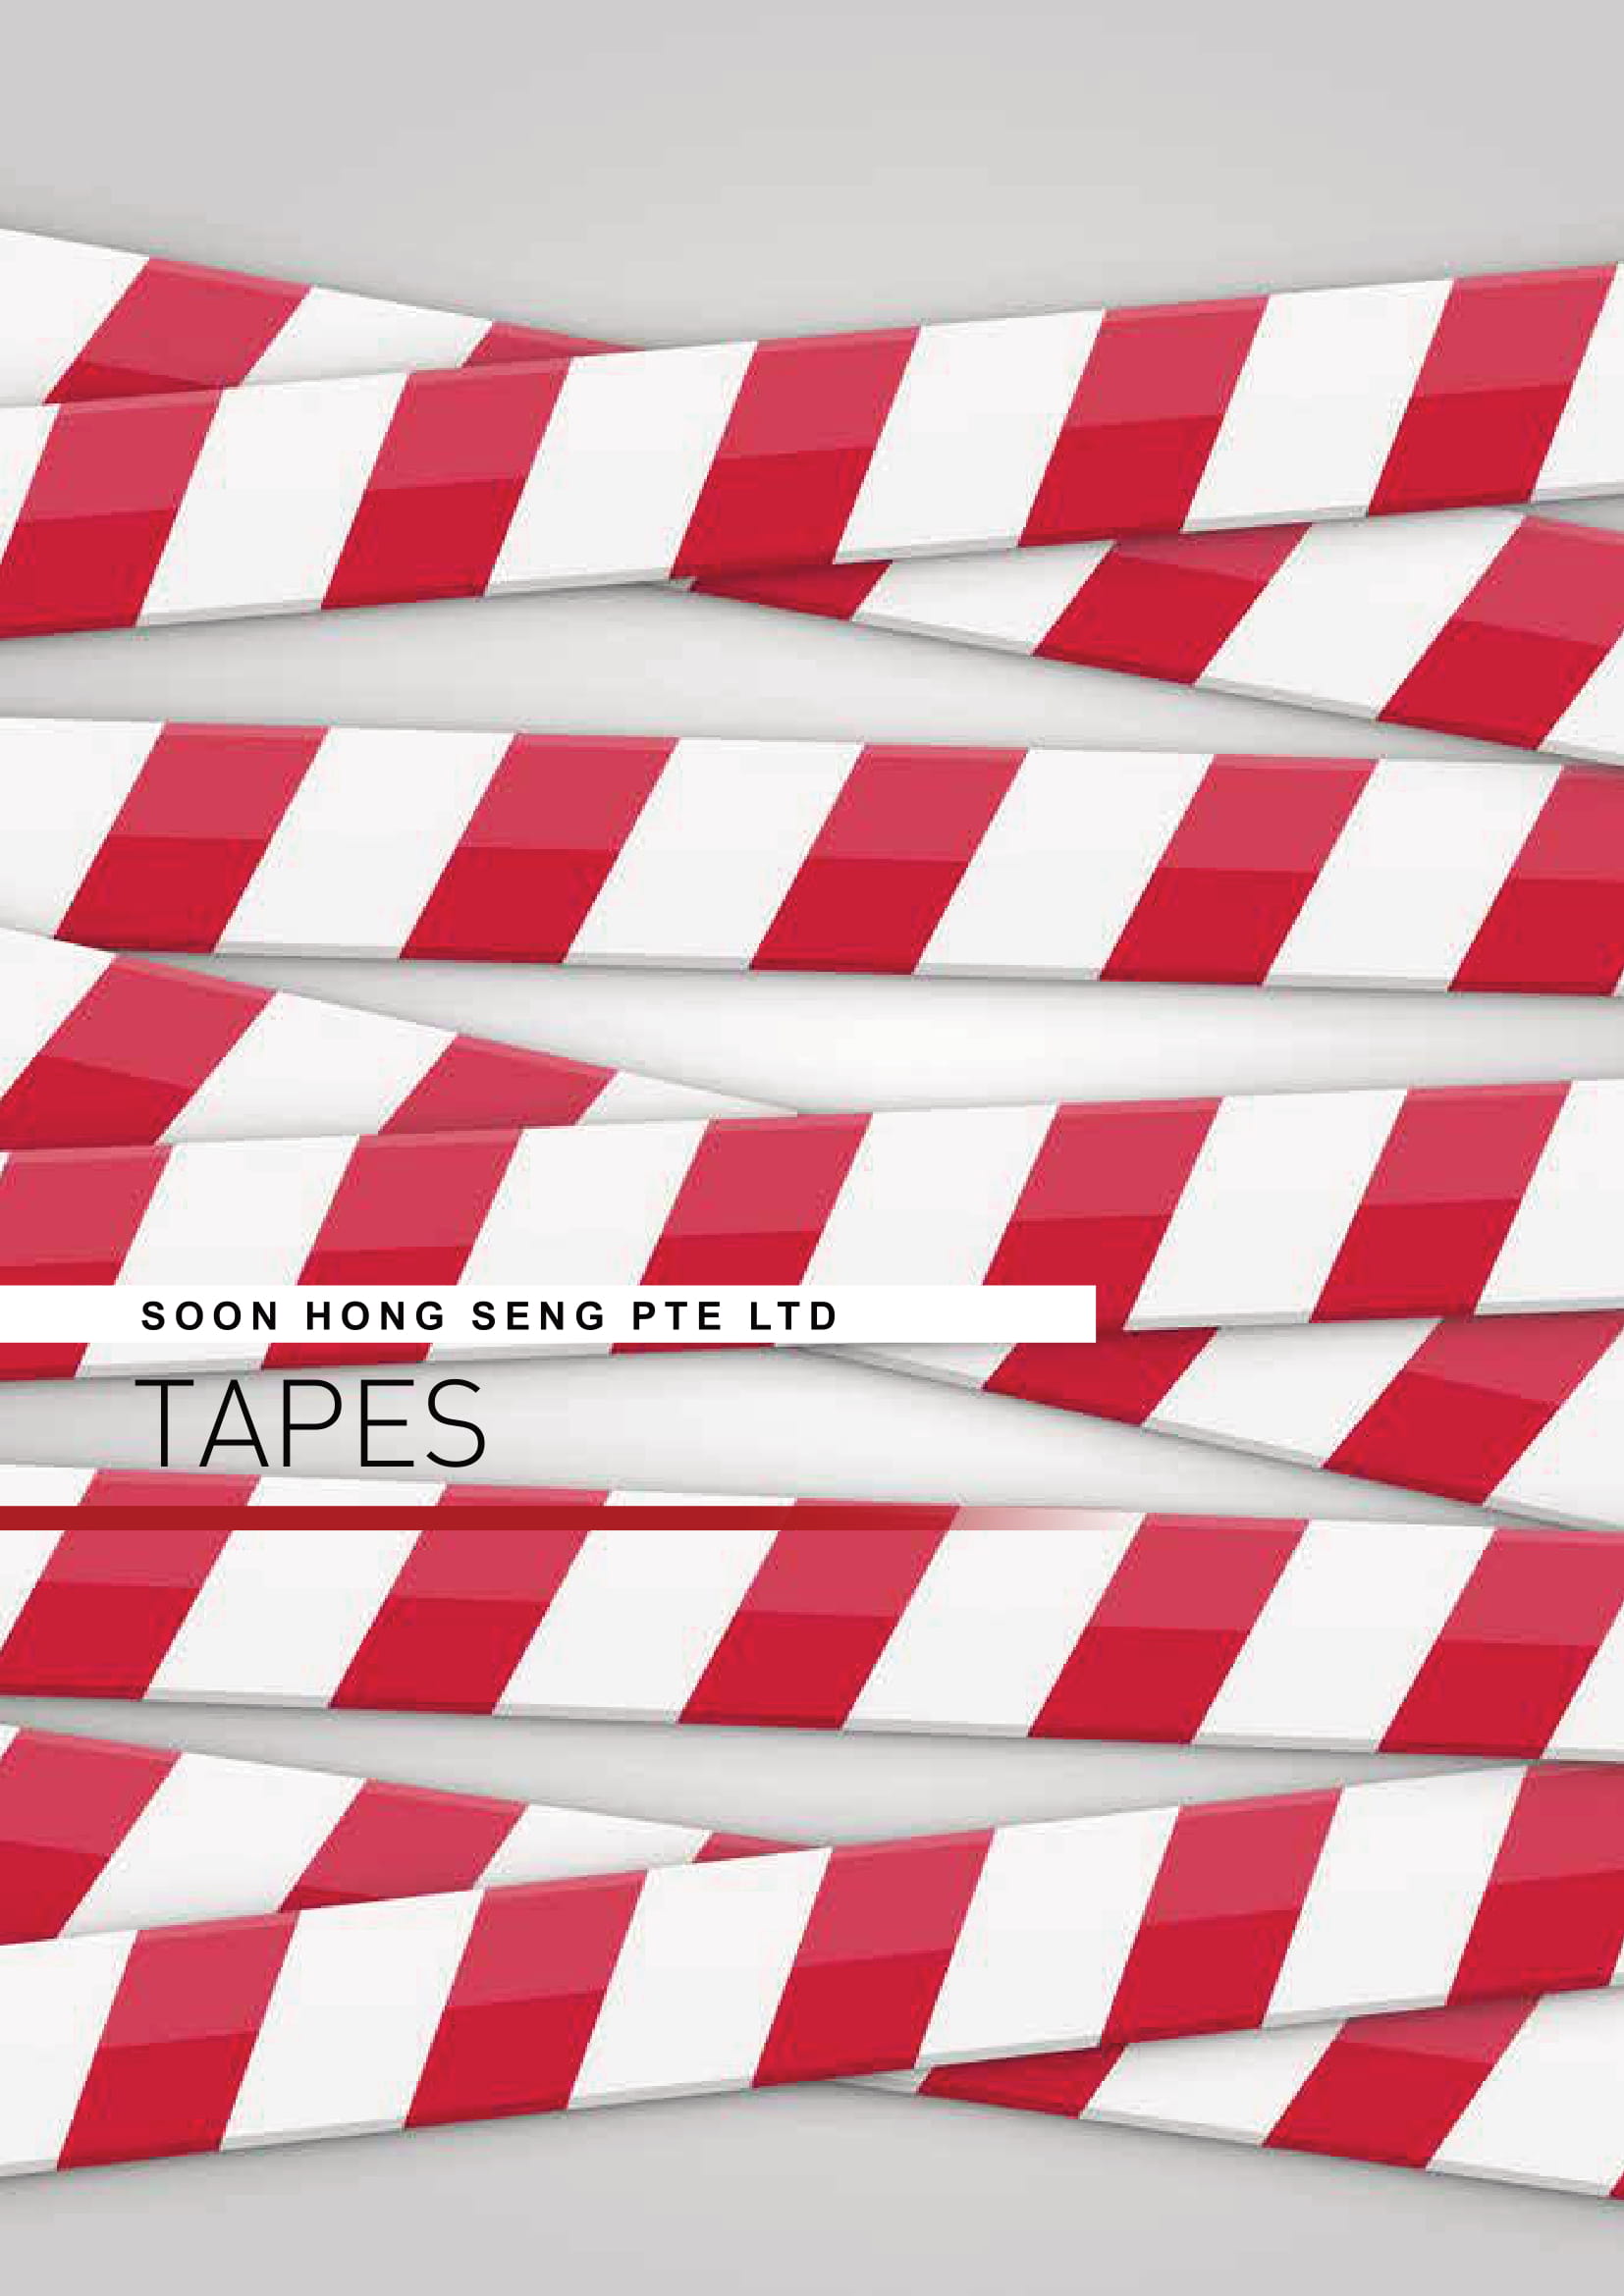 Tapes